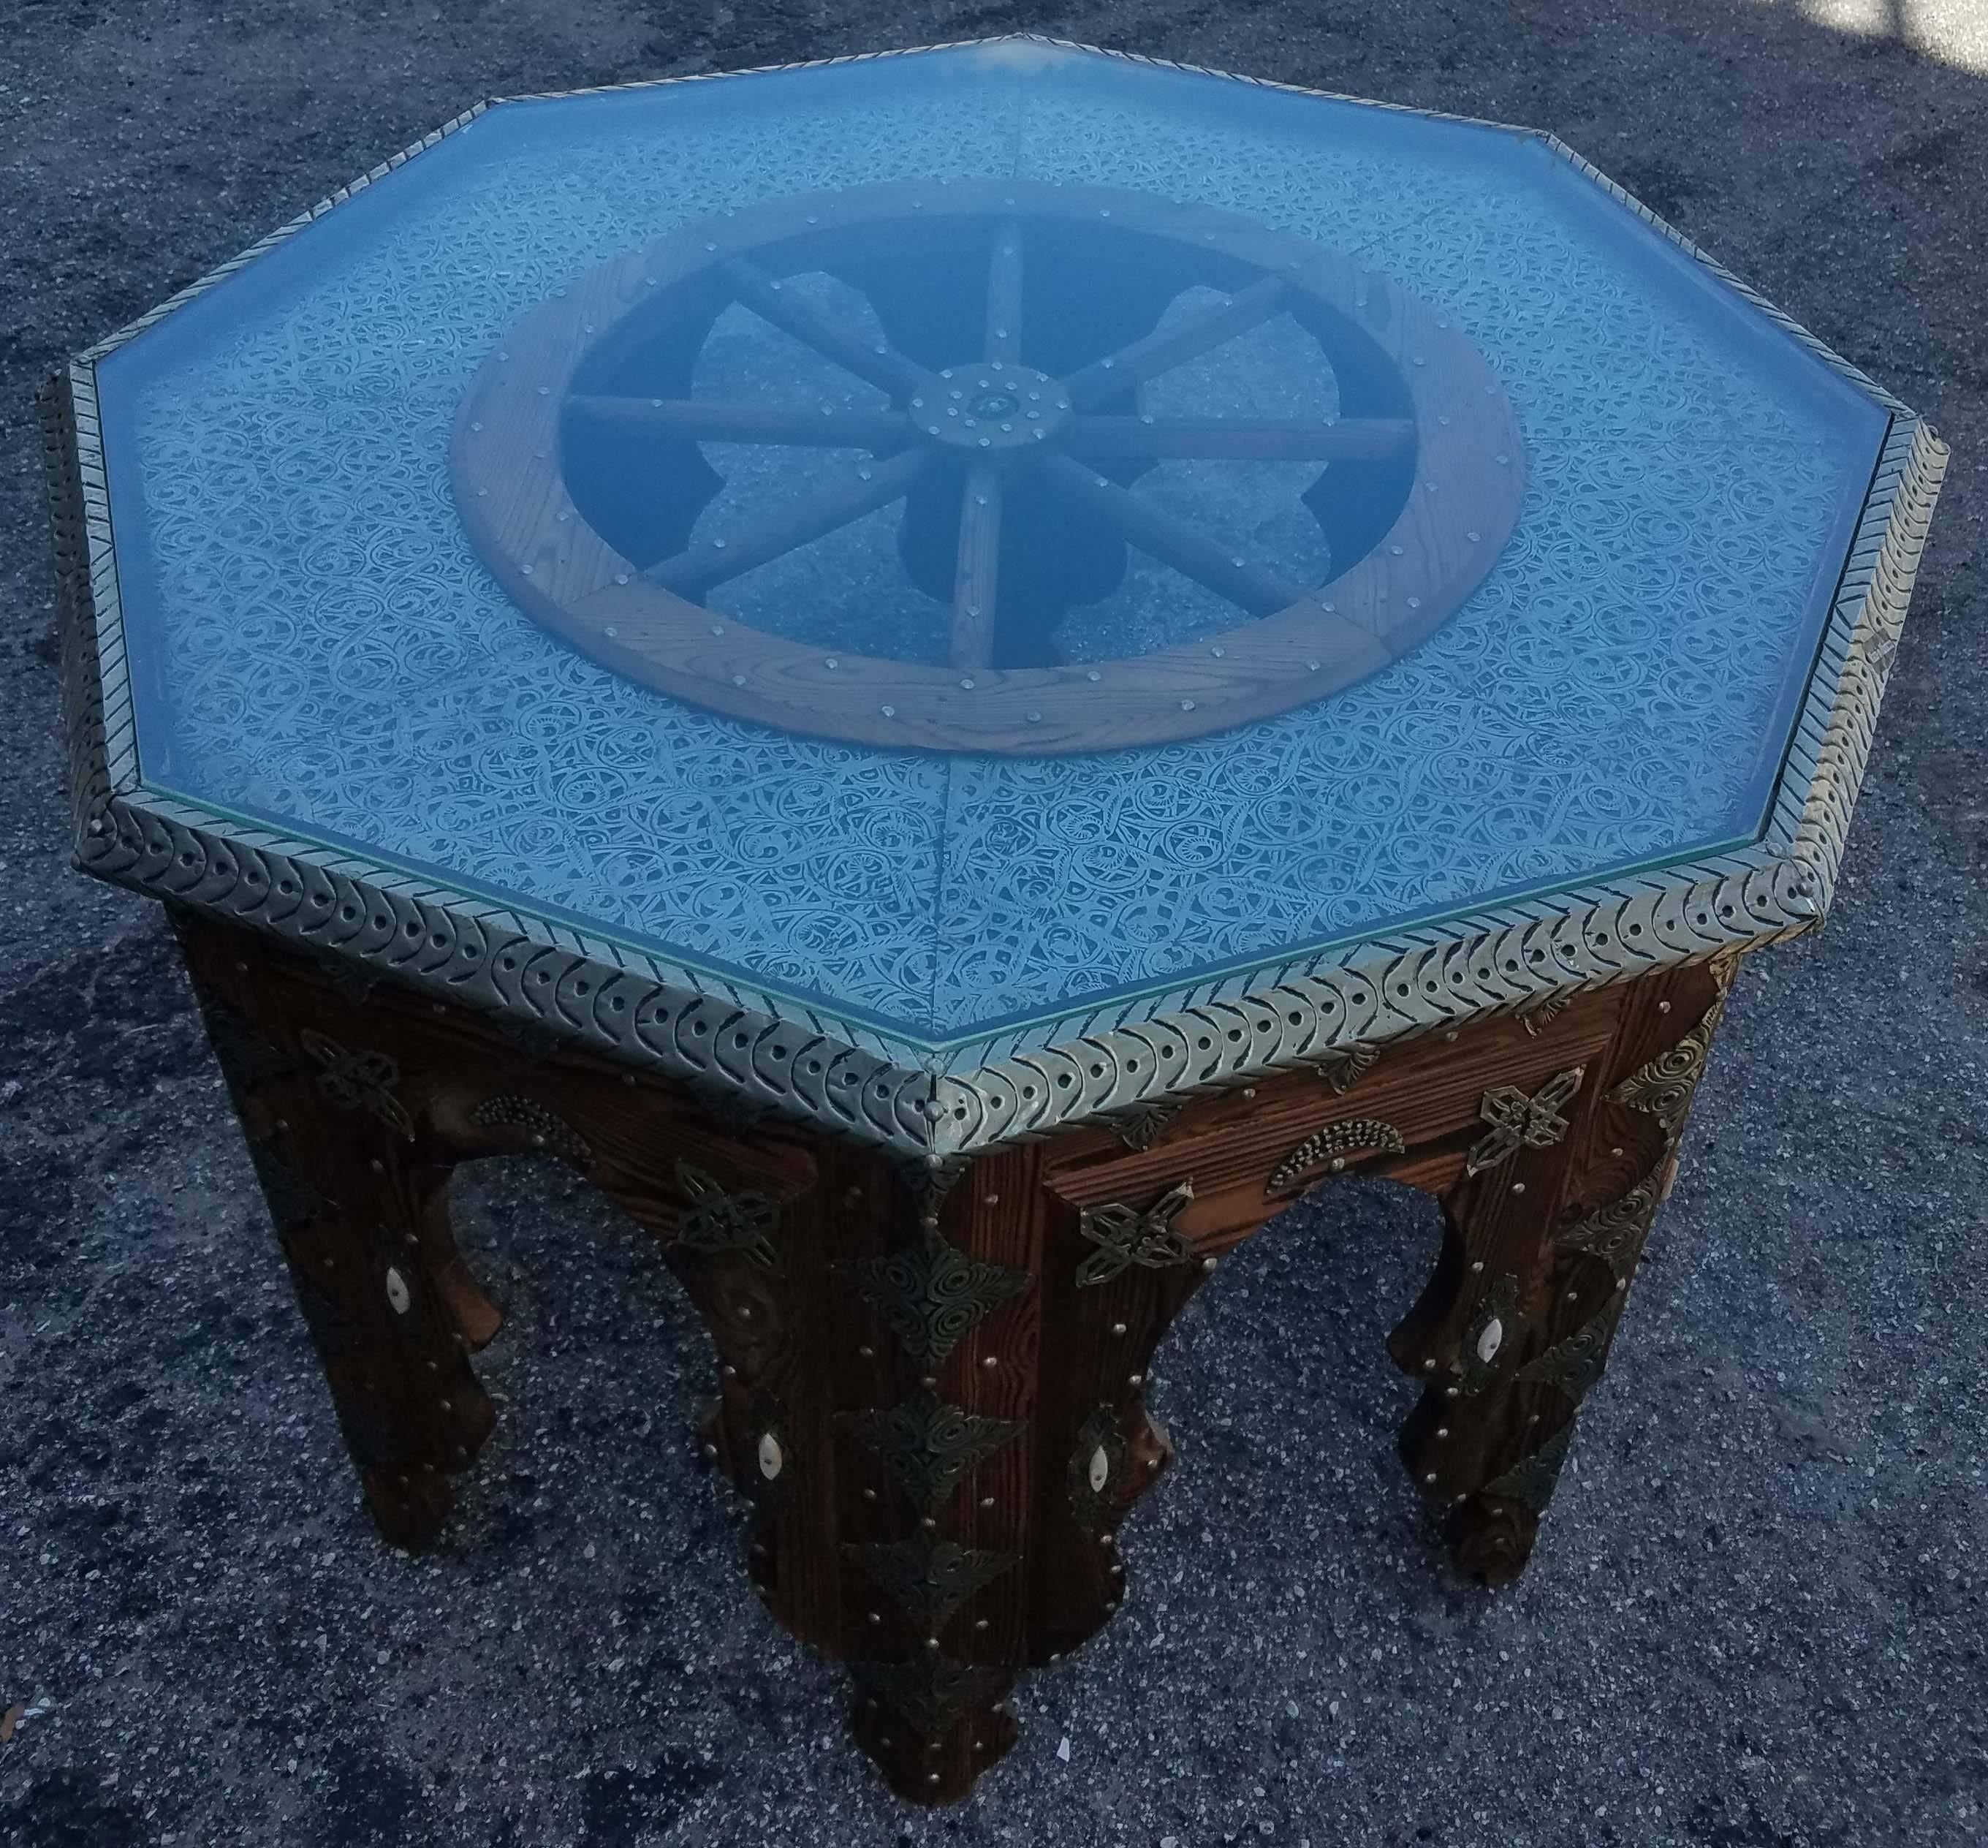 Very exotic hand-carved and metal inlaid Moroccan coffee table. Adorned with detailed carving along the sides and the top, and its ship’s wheel in the center, this table will sure be a excellent add-on to your décor. It measures approximately 37